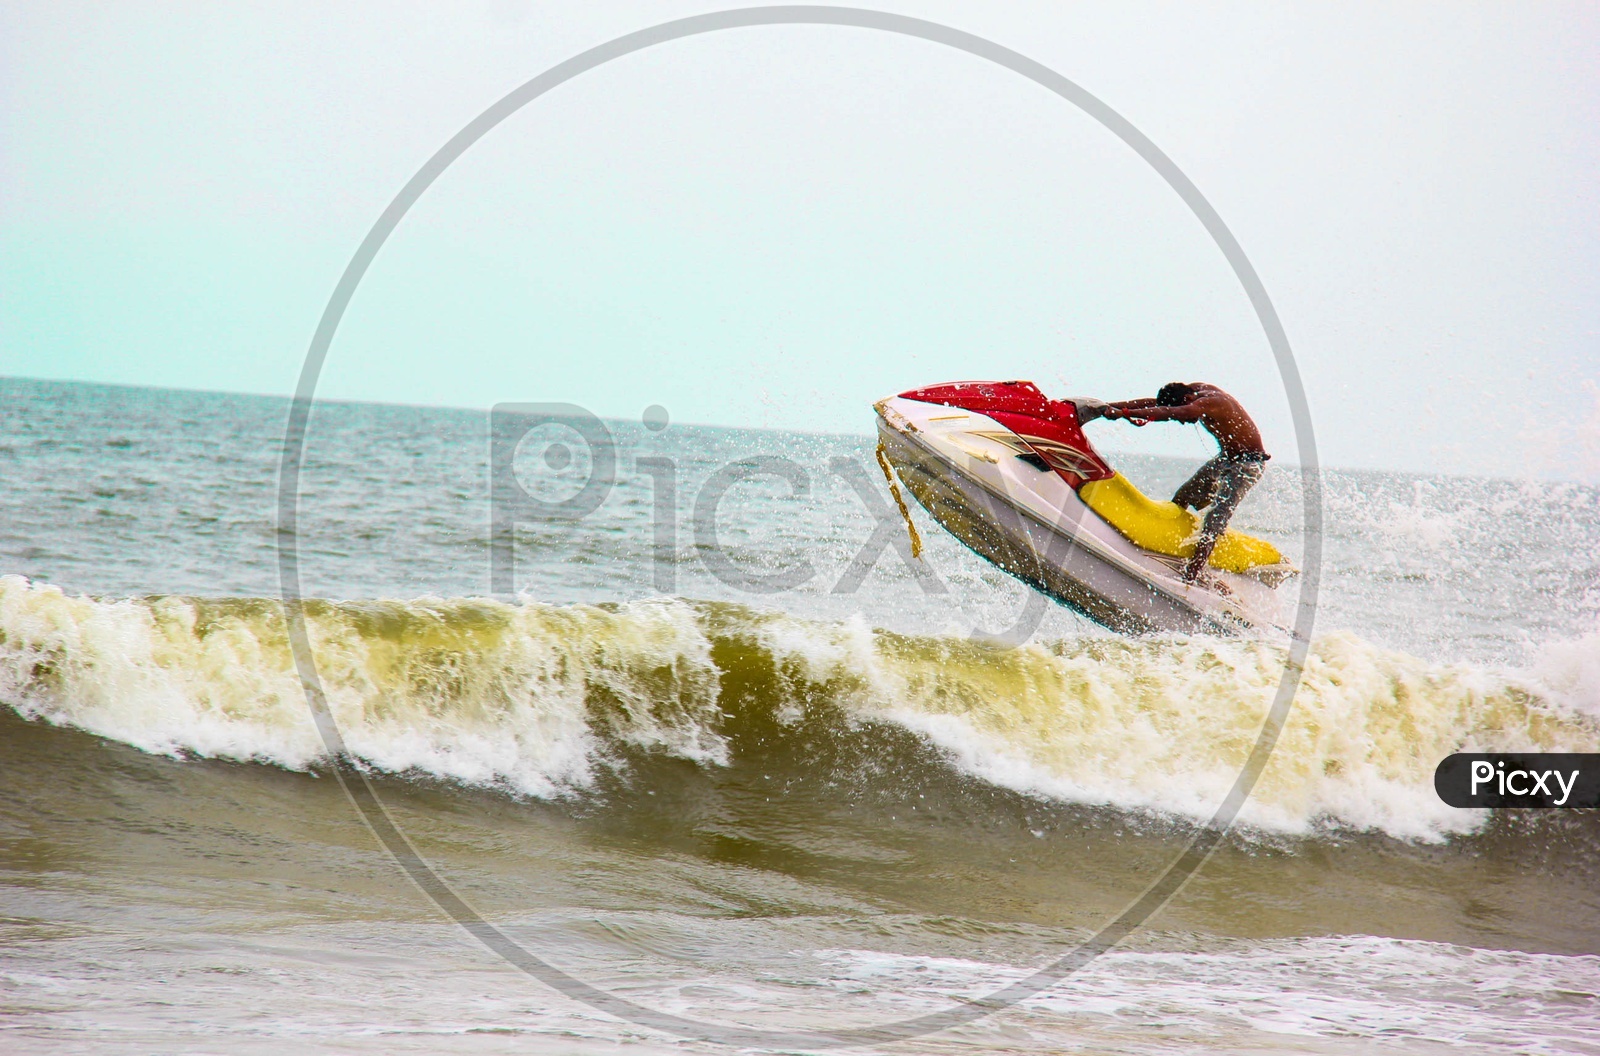 Jet skiing at Goa, such a thrilling experience to ride the tides.